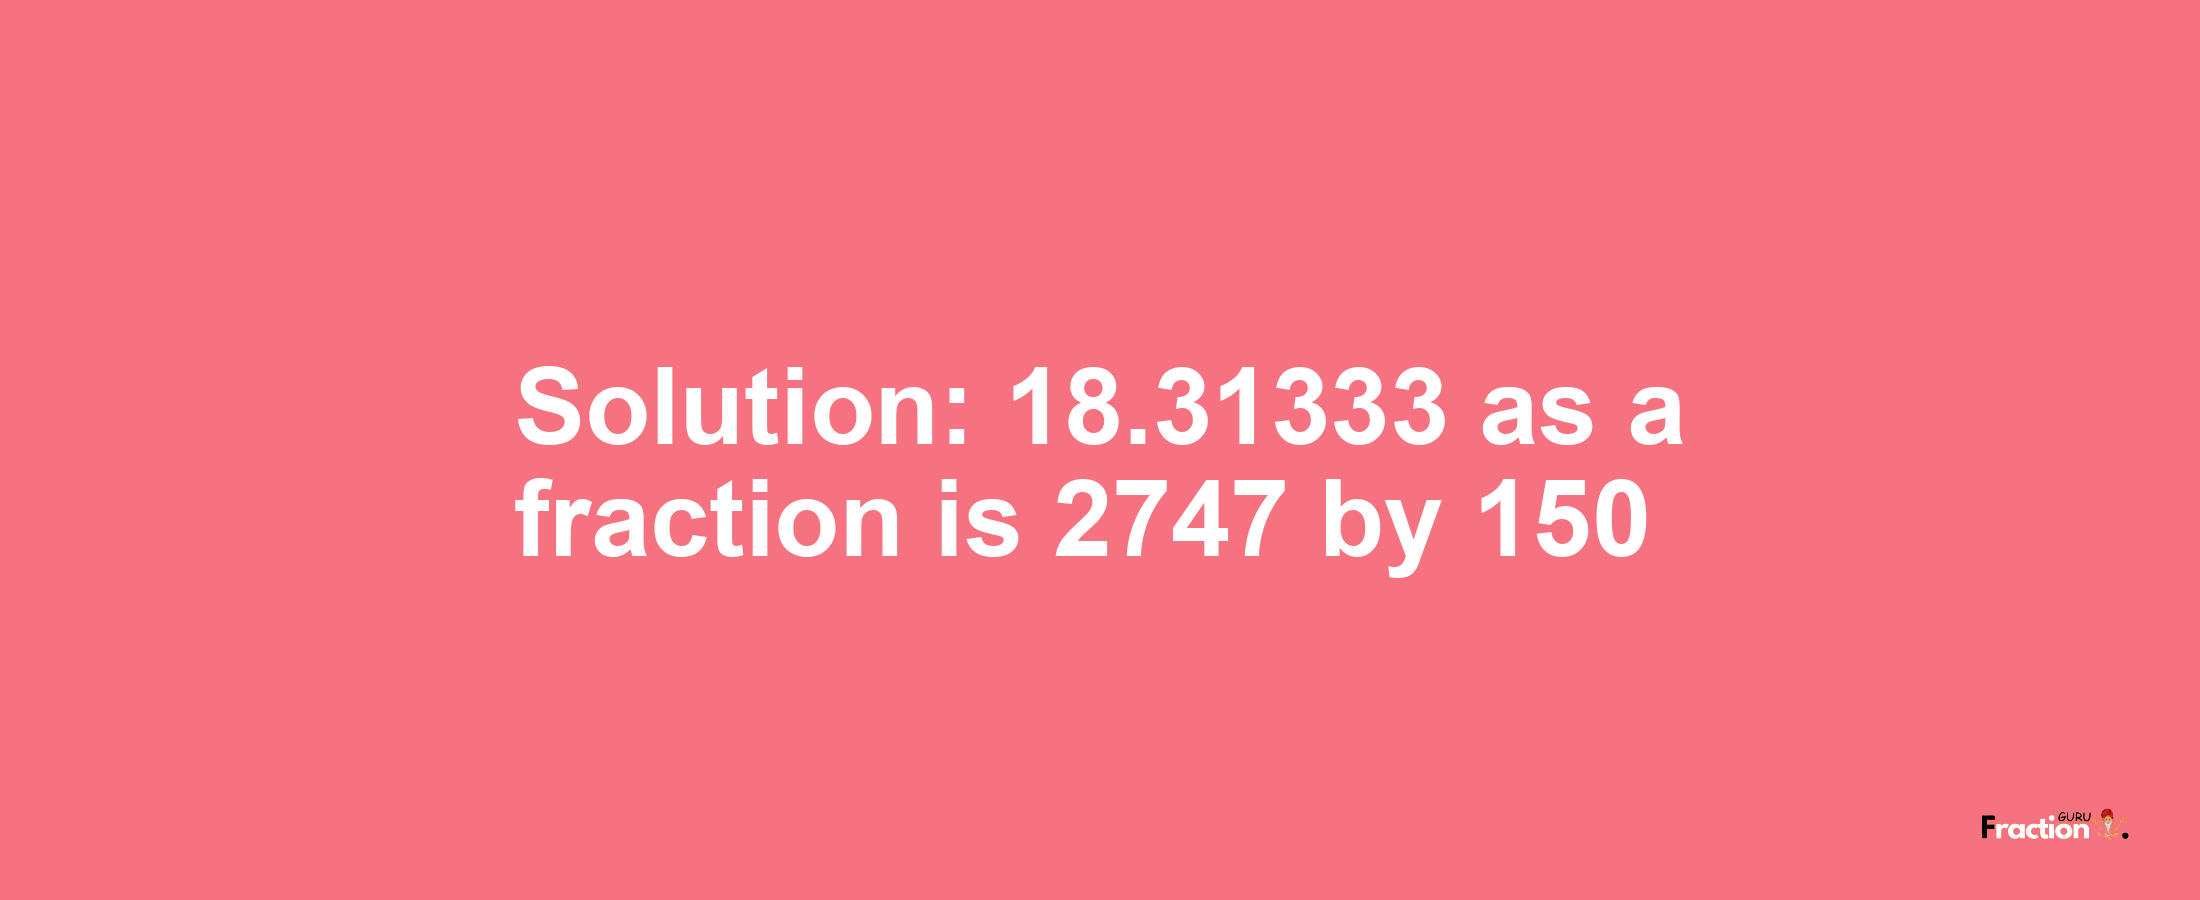 Solution:18.31333 as a fraction is 2747/150